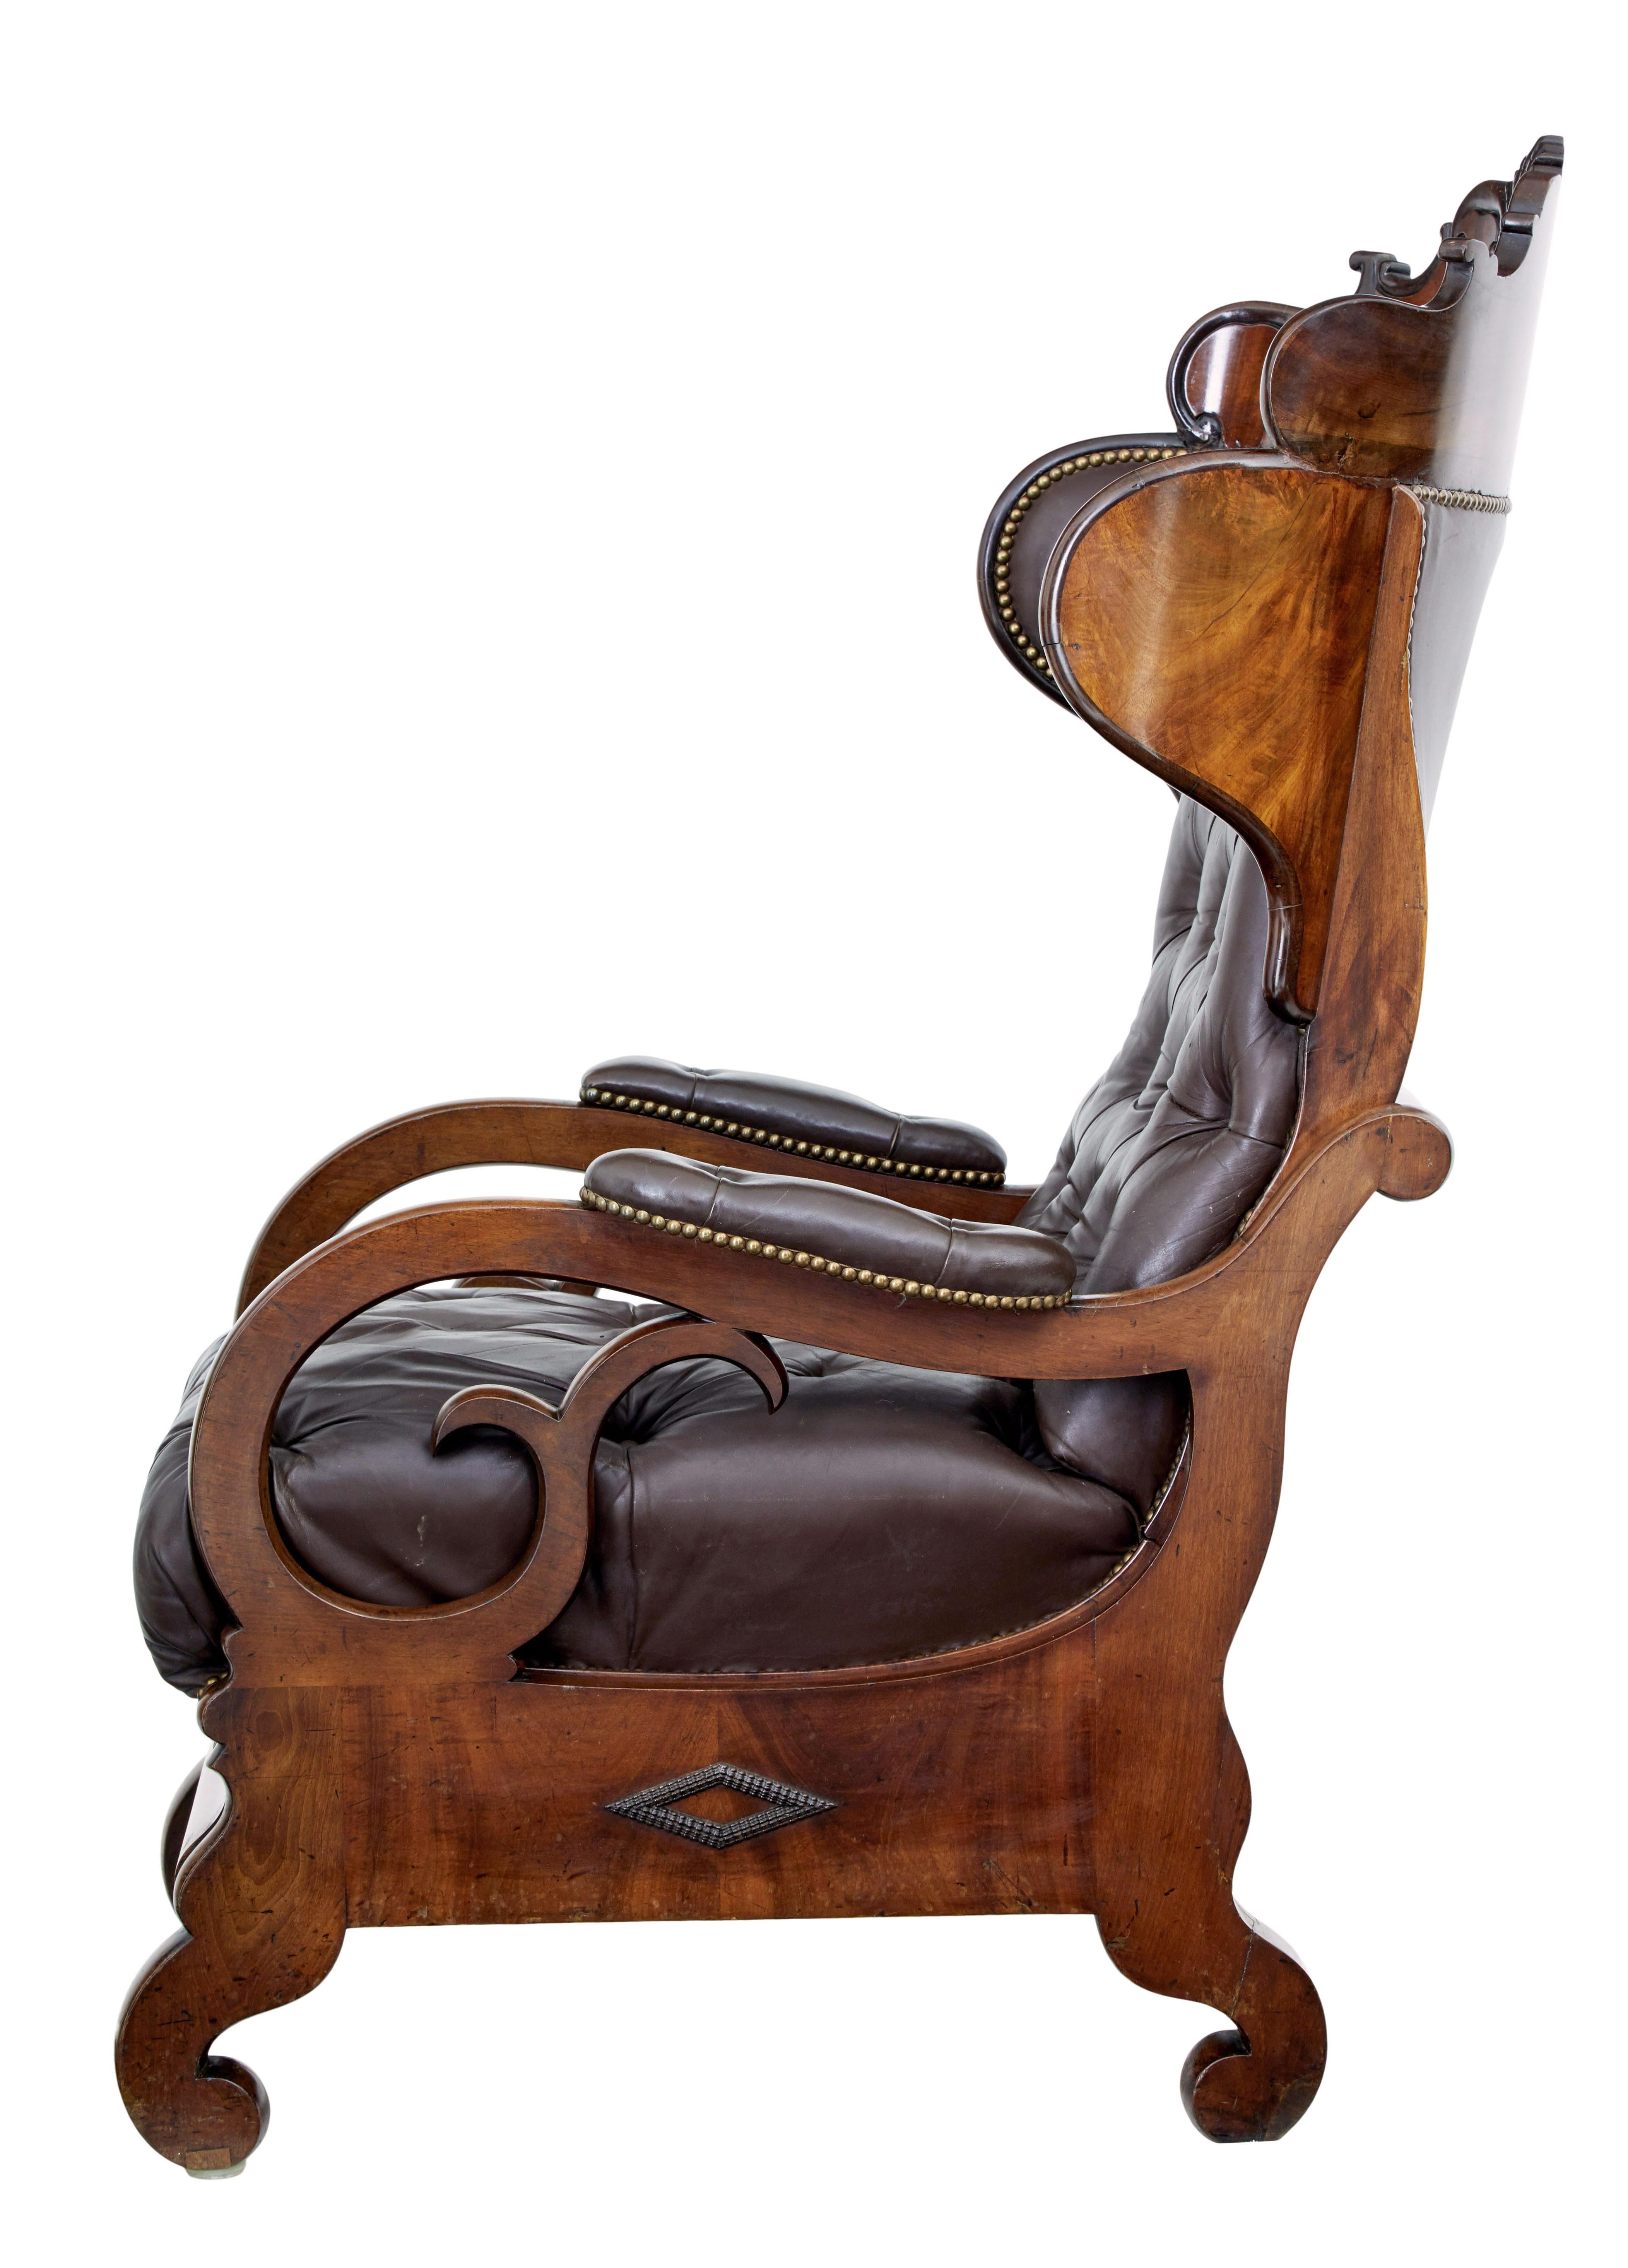 Fine quality mid 19th century french mahogany and leather reclining chair circa 1860.

We are pleased to be able to offer this stunning french flame mahogany reclining chair for sale. Designed to provide the ultimate in comfort during the 19th